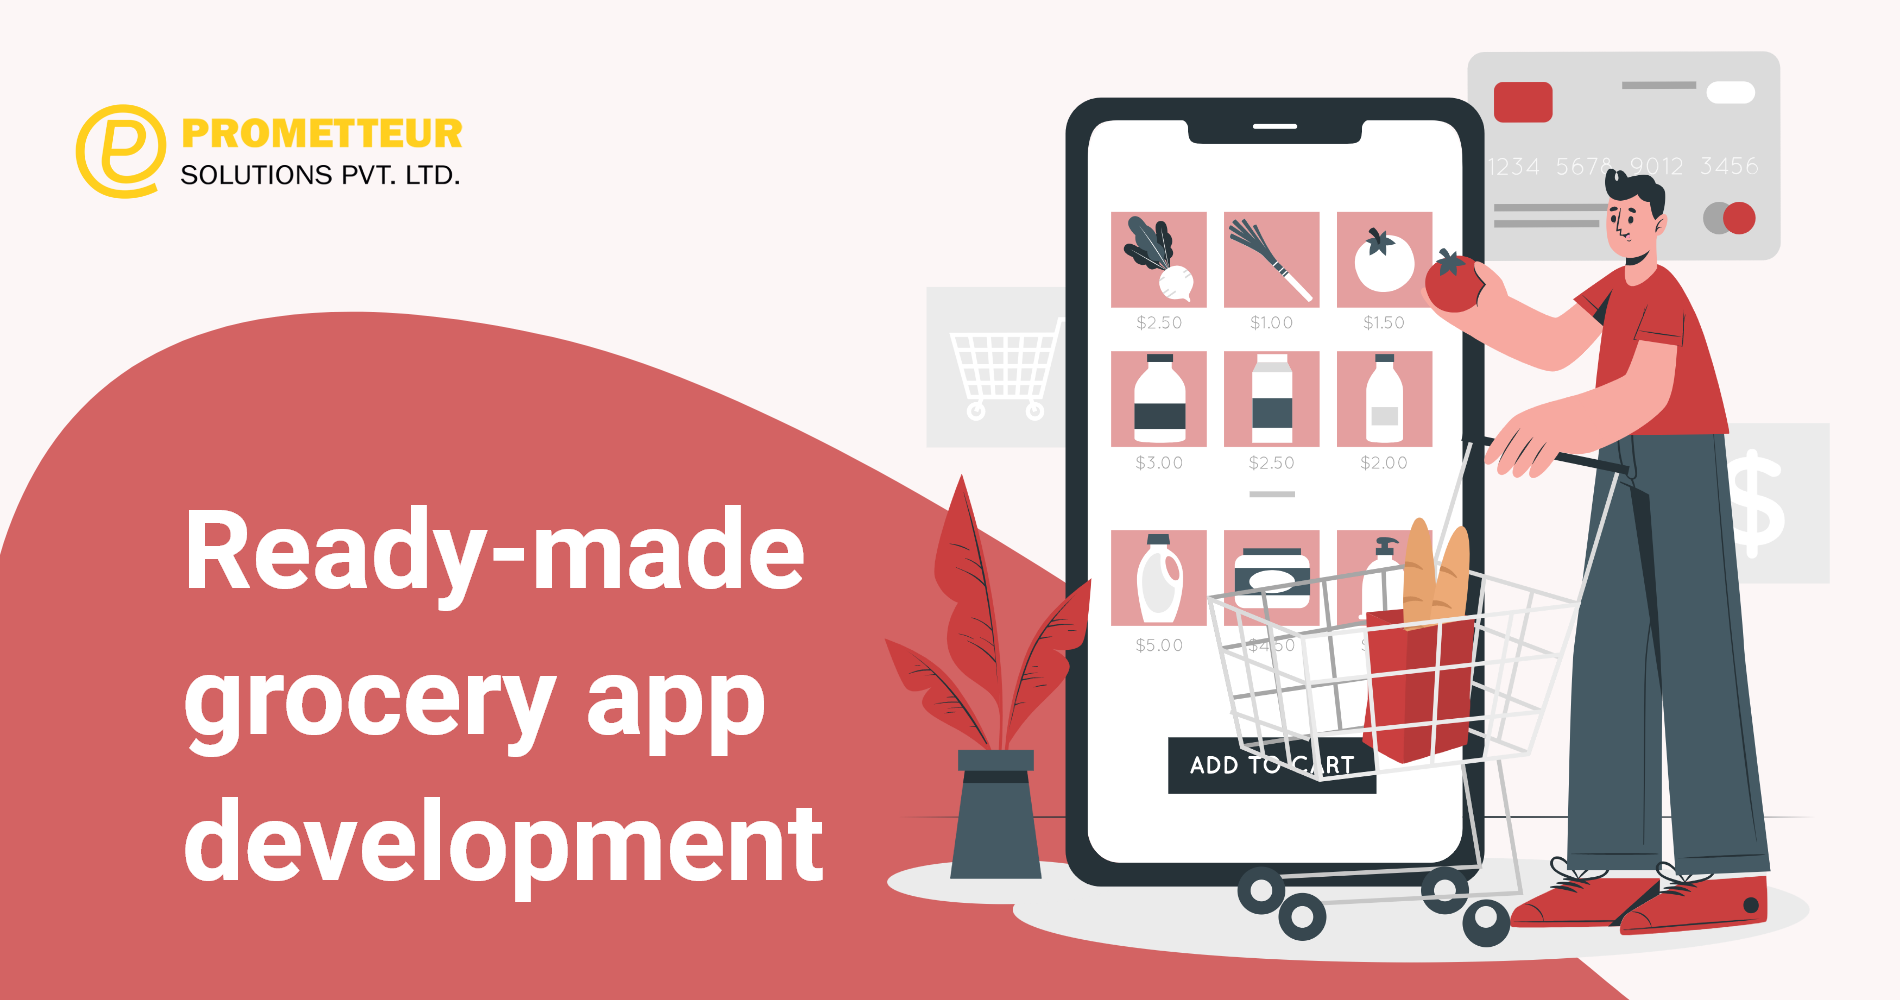 What is a Ready-made grocery app?